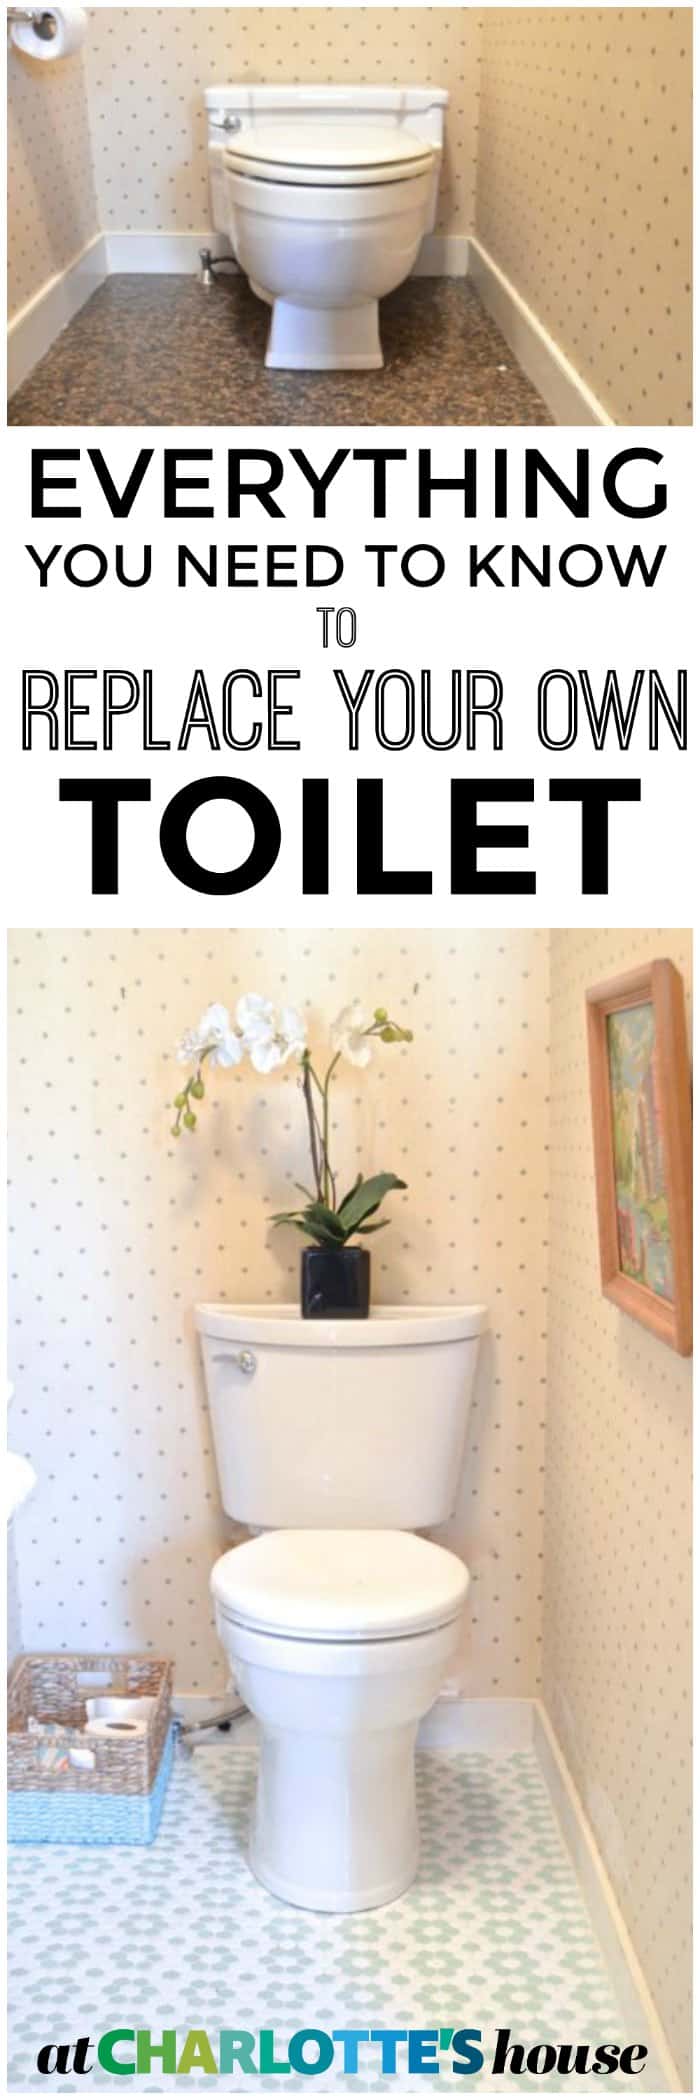 All the steps you need to know to replace your own toilet... with video! Save money AND get a prettier bathroom!